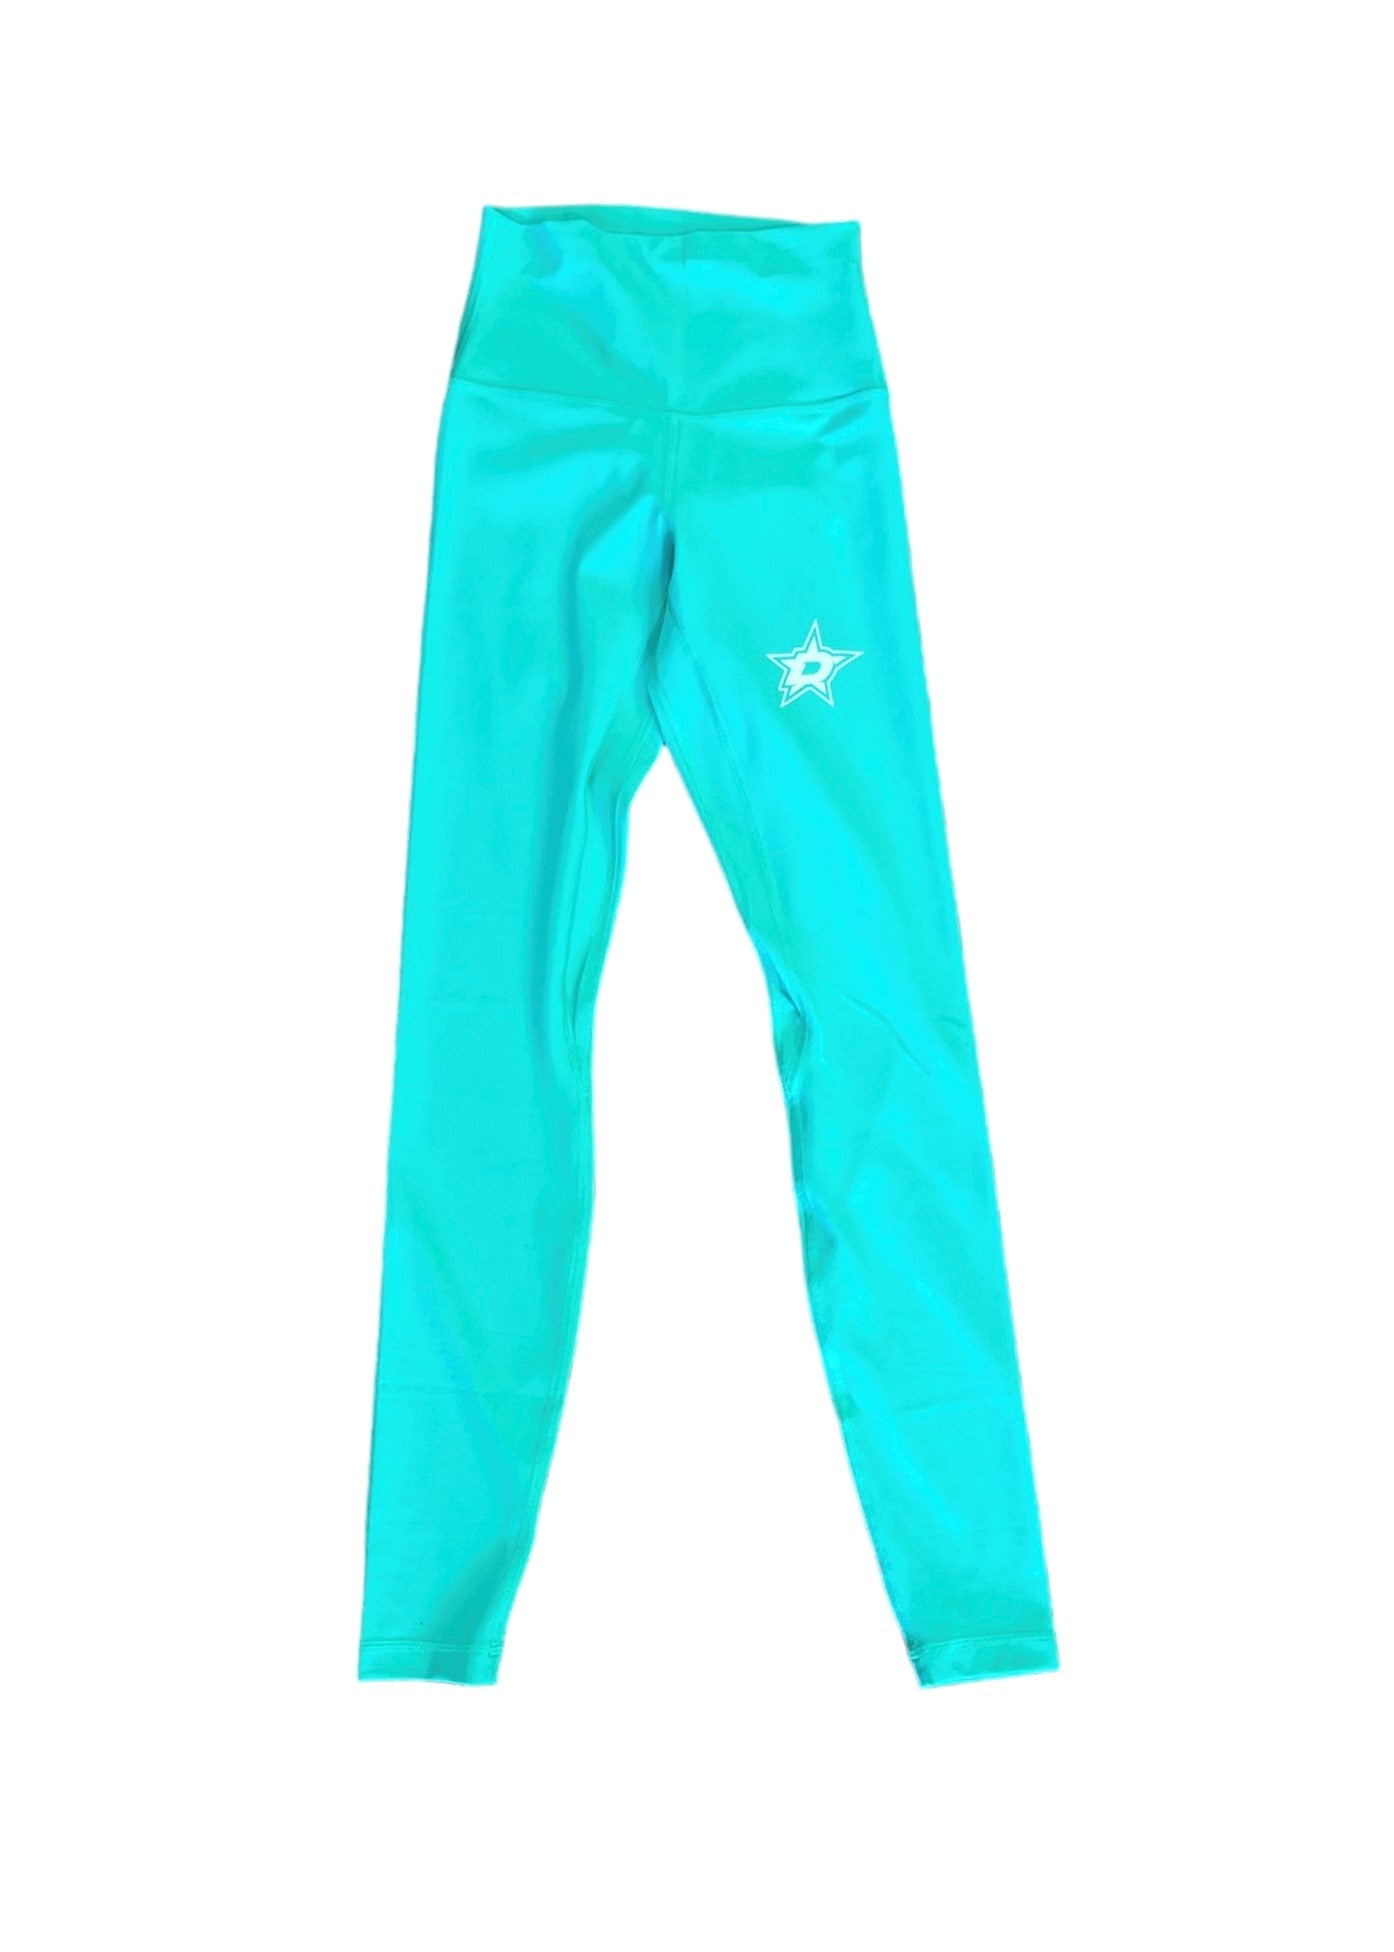 DALLAS STARS LULULEMON WOMENS ALIGN PANT GREEN - FRONT VIEW